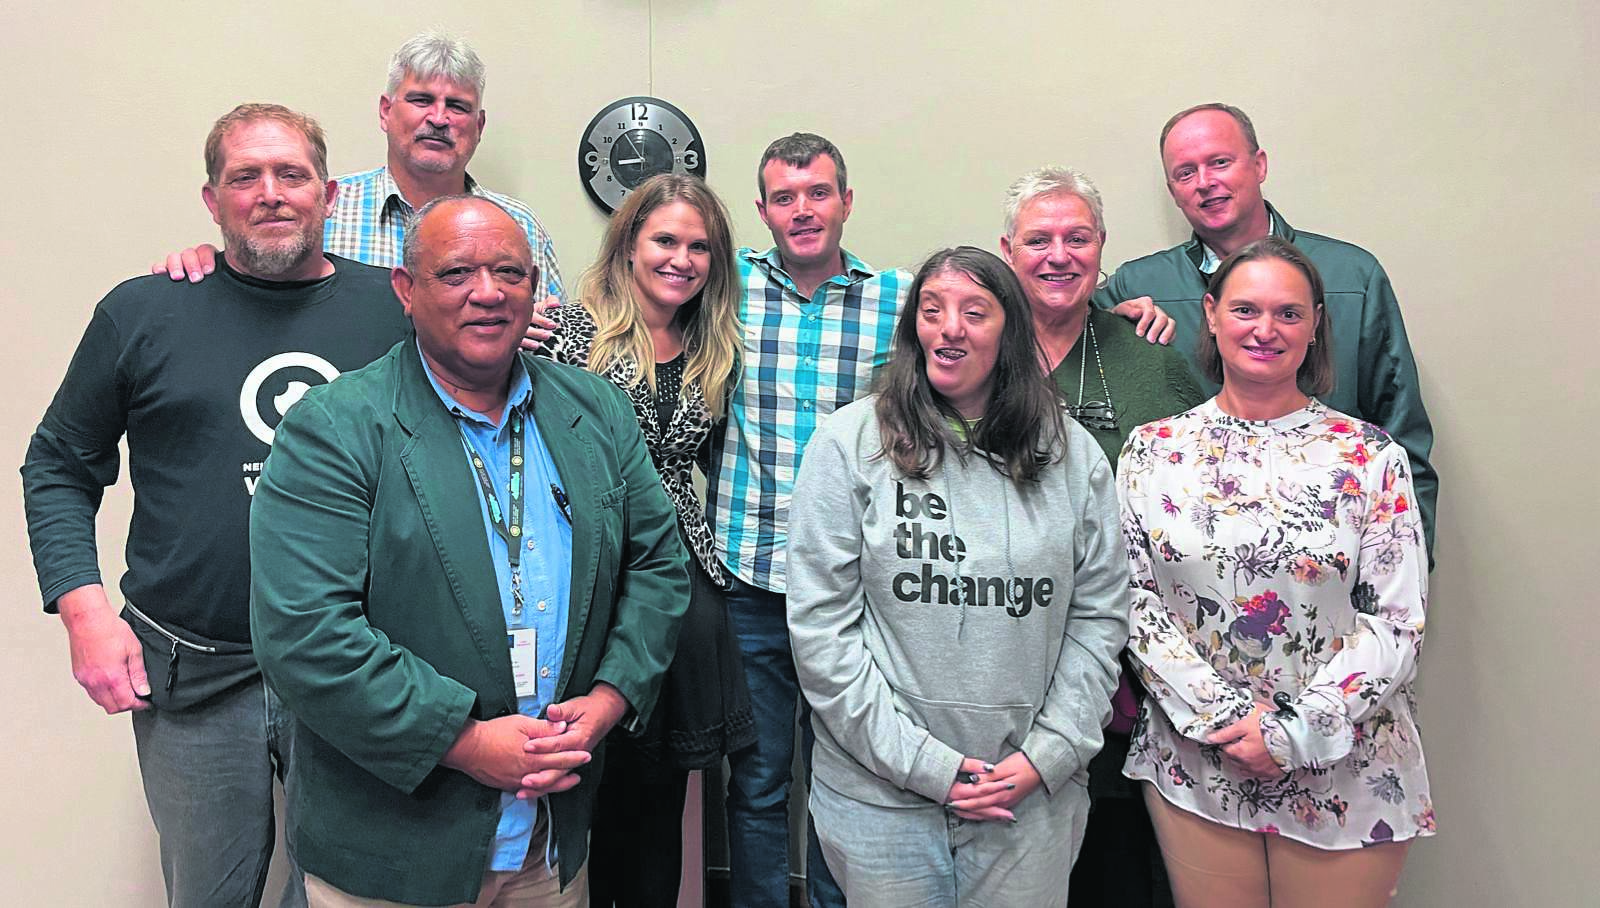 The newly elected committee of the Avon-Tijger Neighbourhood Watch are from left at the back, Bennie van Almelo, Mario Erlank, Kim de Jager, Riaan de Jager, Jeanette Venter and Hans Huyshamen. In the front from left are Roger Cannon (Ward Councillor) with committee members Natasha du Toit and Nicolette du Toit.